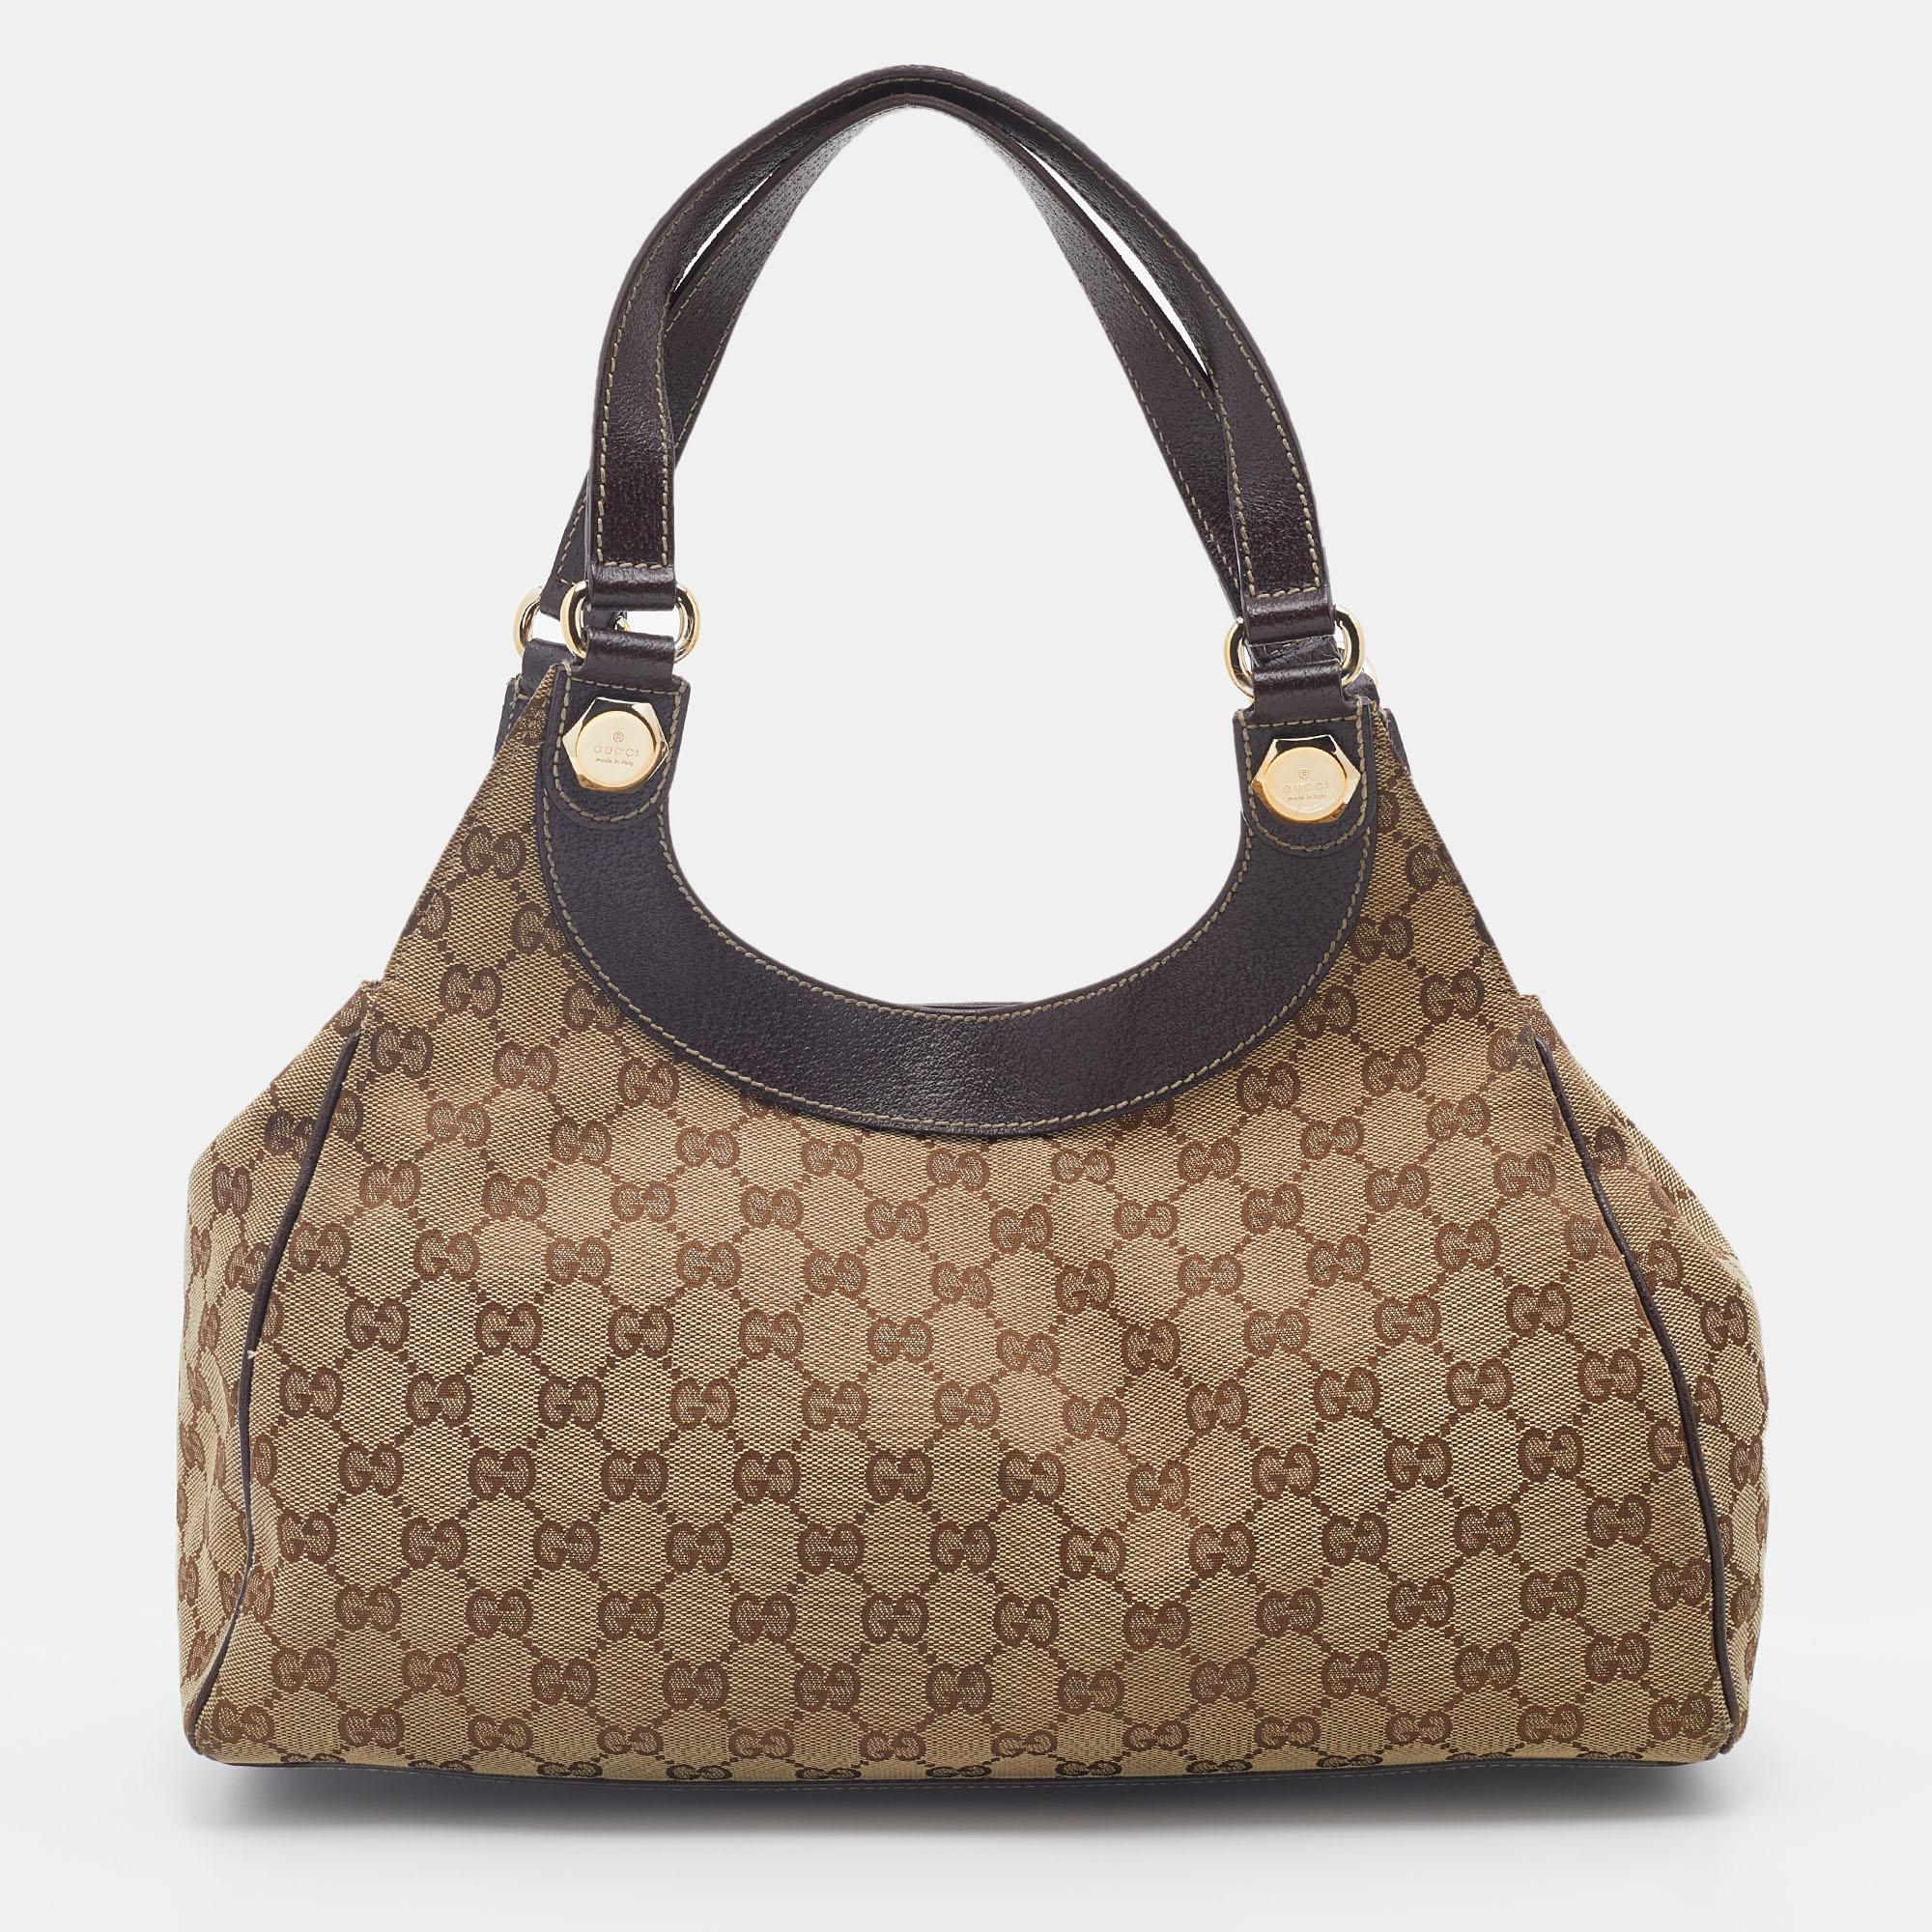 The simple silhouette and the use of GG canvas and leather for the exterior bring out the appeal of this authentic Gucci bag. It features dual flat handles, gold-tone hardware, and a fabric-lined interior.

Includes: Info Booklet, Original Dustbag
 